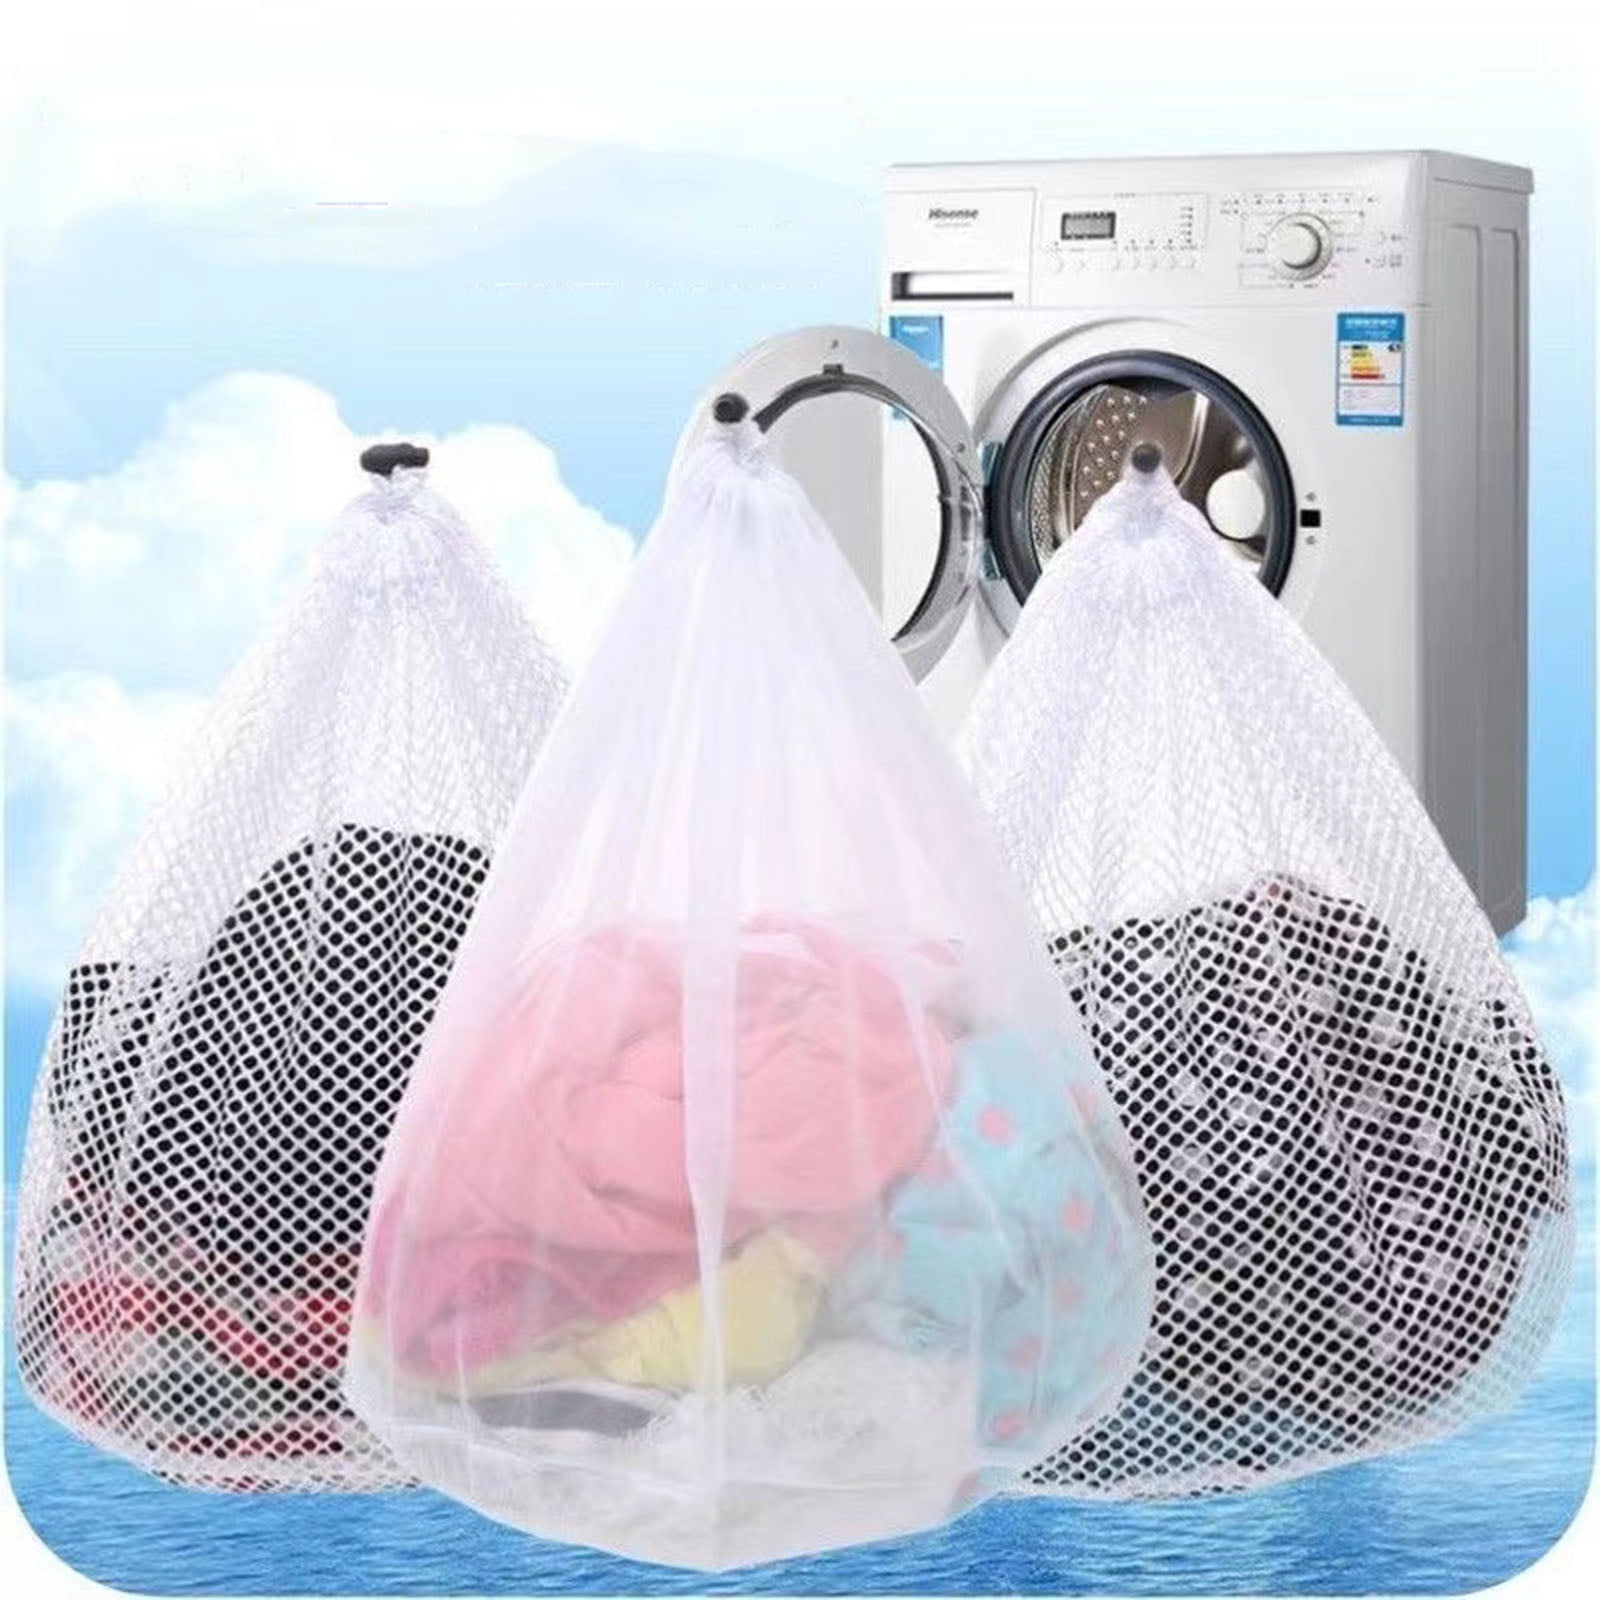  Mesh Laundry Bag,Iclean Laundry Wash Bag Best Zipper Premium  Quality Wash Bag Bra Washer Protector For Delicates/Washing Machine/College  Student/Travel/Baby Clothes/Undergarment Laundry Bag (8 Packs) : Home &  Kitchen